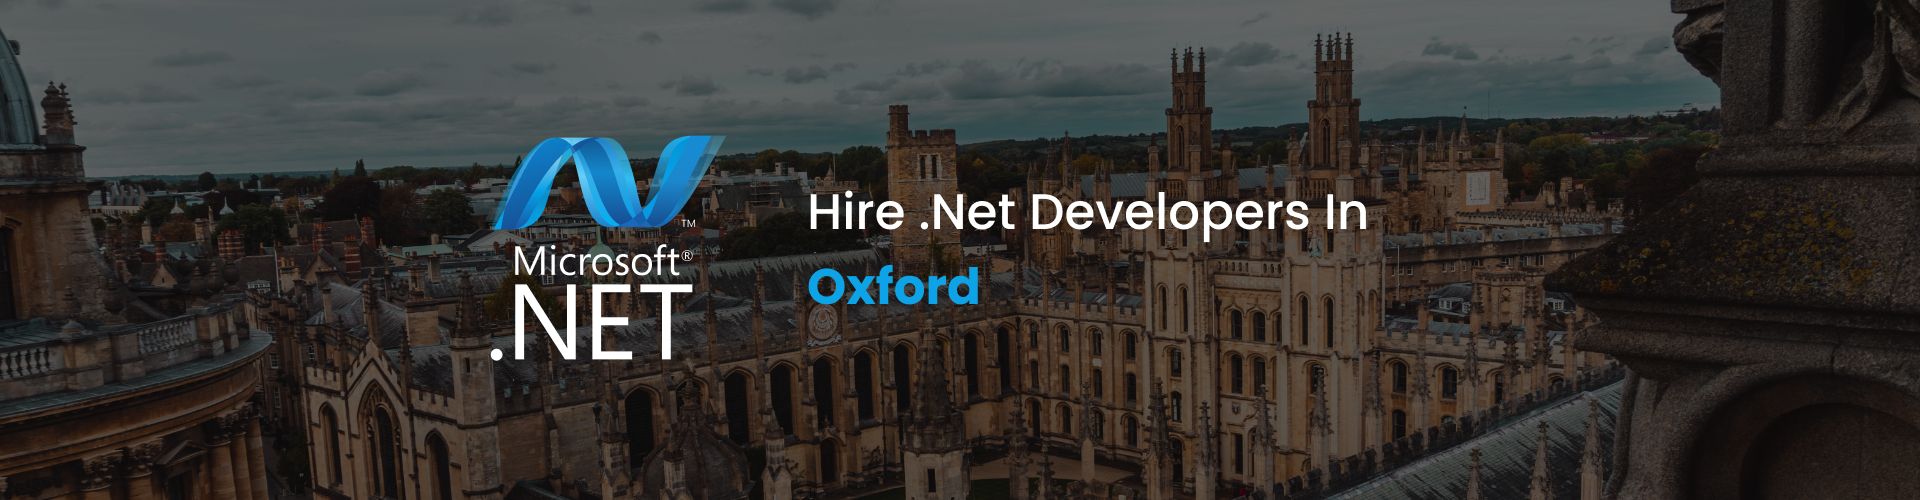 hire dot net developers in oxford